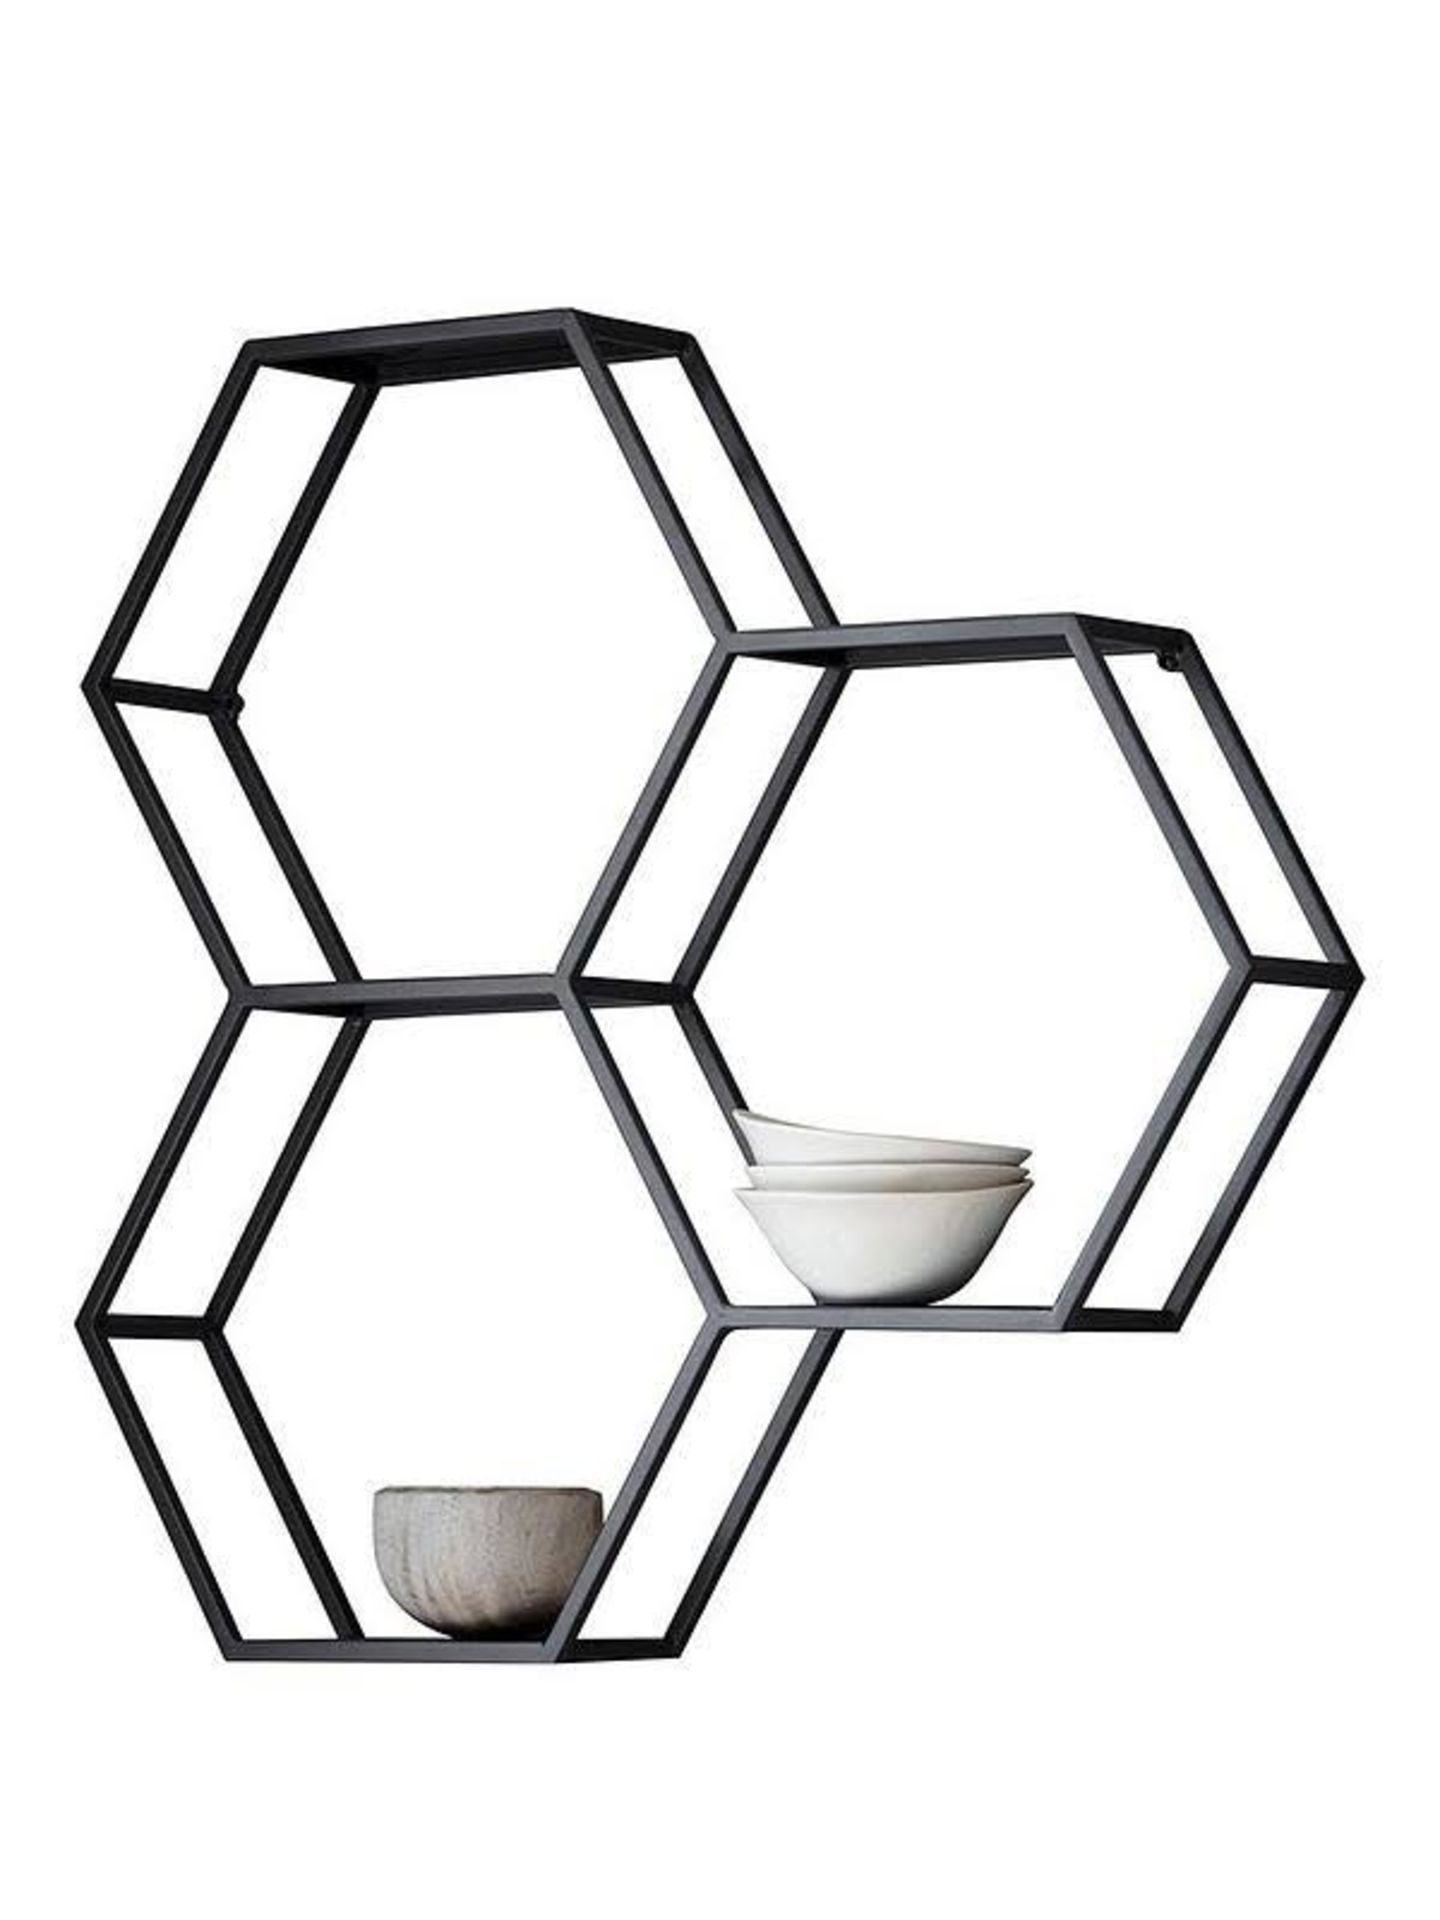 Hudson Gallery Heston Metal Hexagon Wall Mounted Storage Unit Shelf in Black - Brand New and Boxed - Image 3 of 3